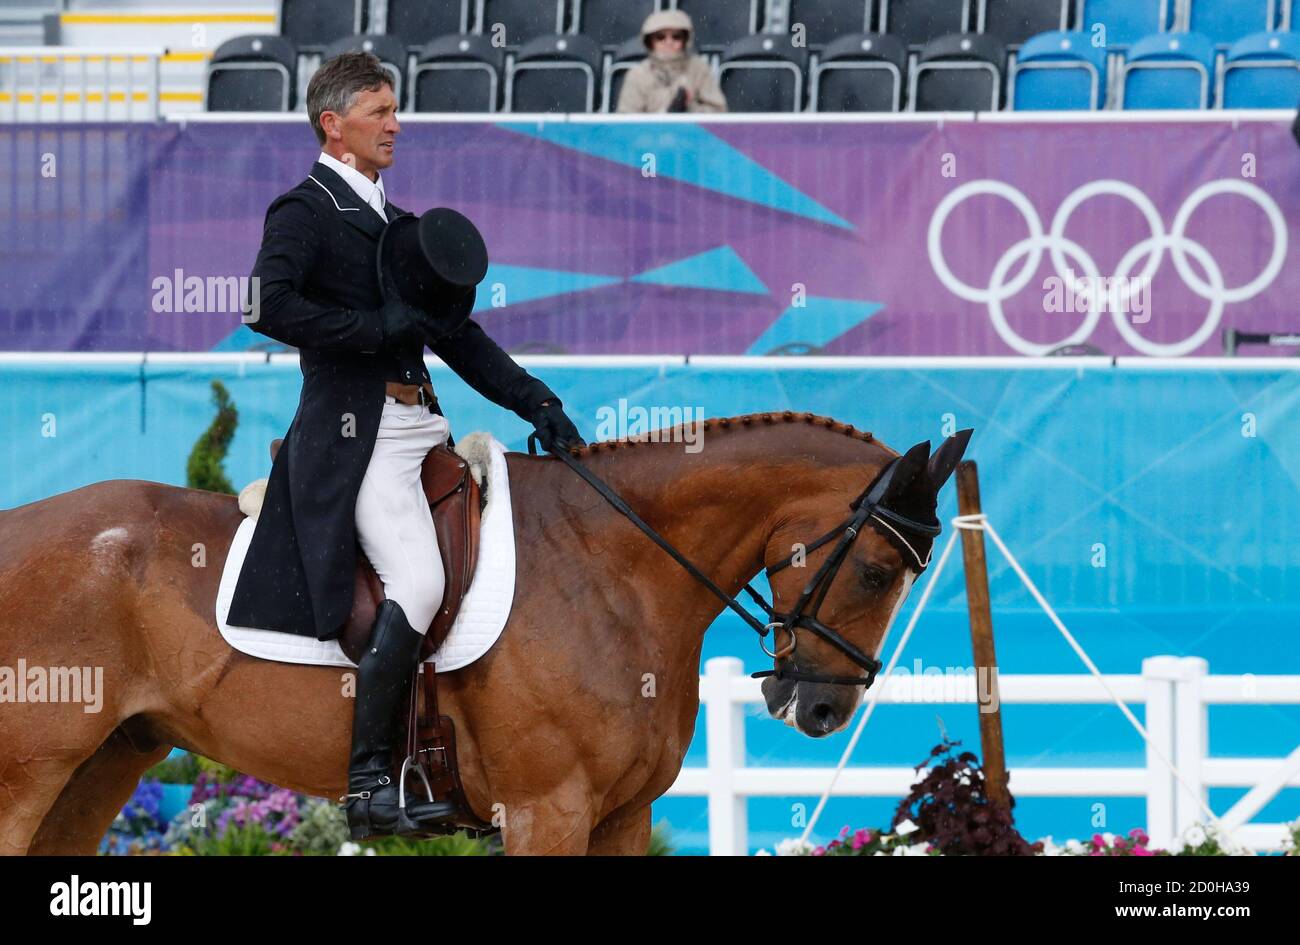 Andrew Nicholson of New Zealand riding Nereo gestures during the equestrian Eventing Individual Dressage Day 2 in the Greenwich Park during the London 2012 Olympic Games, July 29, 2012.              REUTERS/Mike Hutchings (BRITAIN  - Tags: SPORT EQUESTRIANISM OLYMPICS) Stock Photo